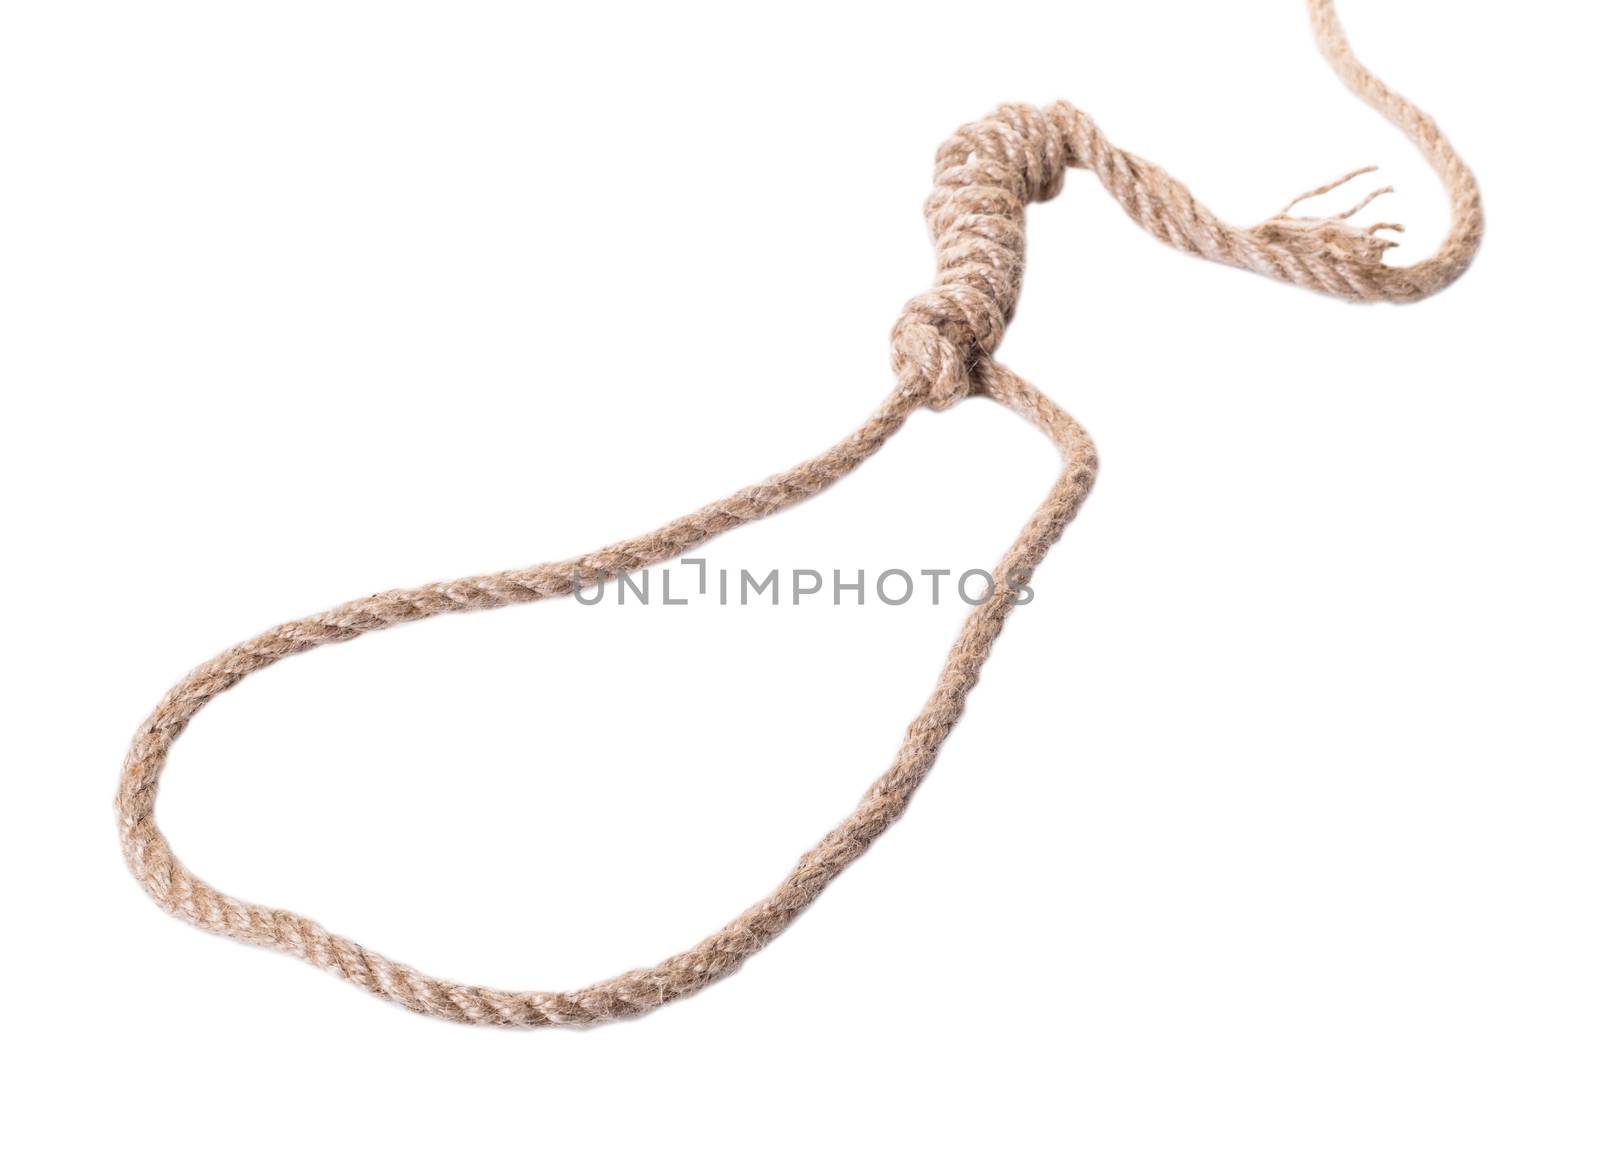 old rope closeup on white isolated background